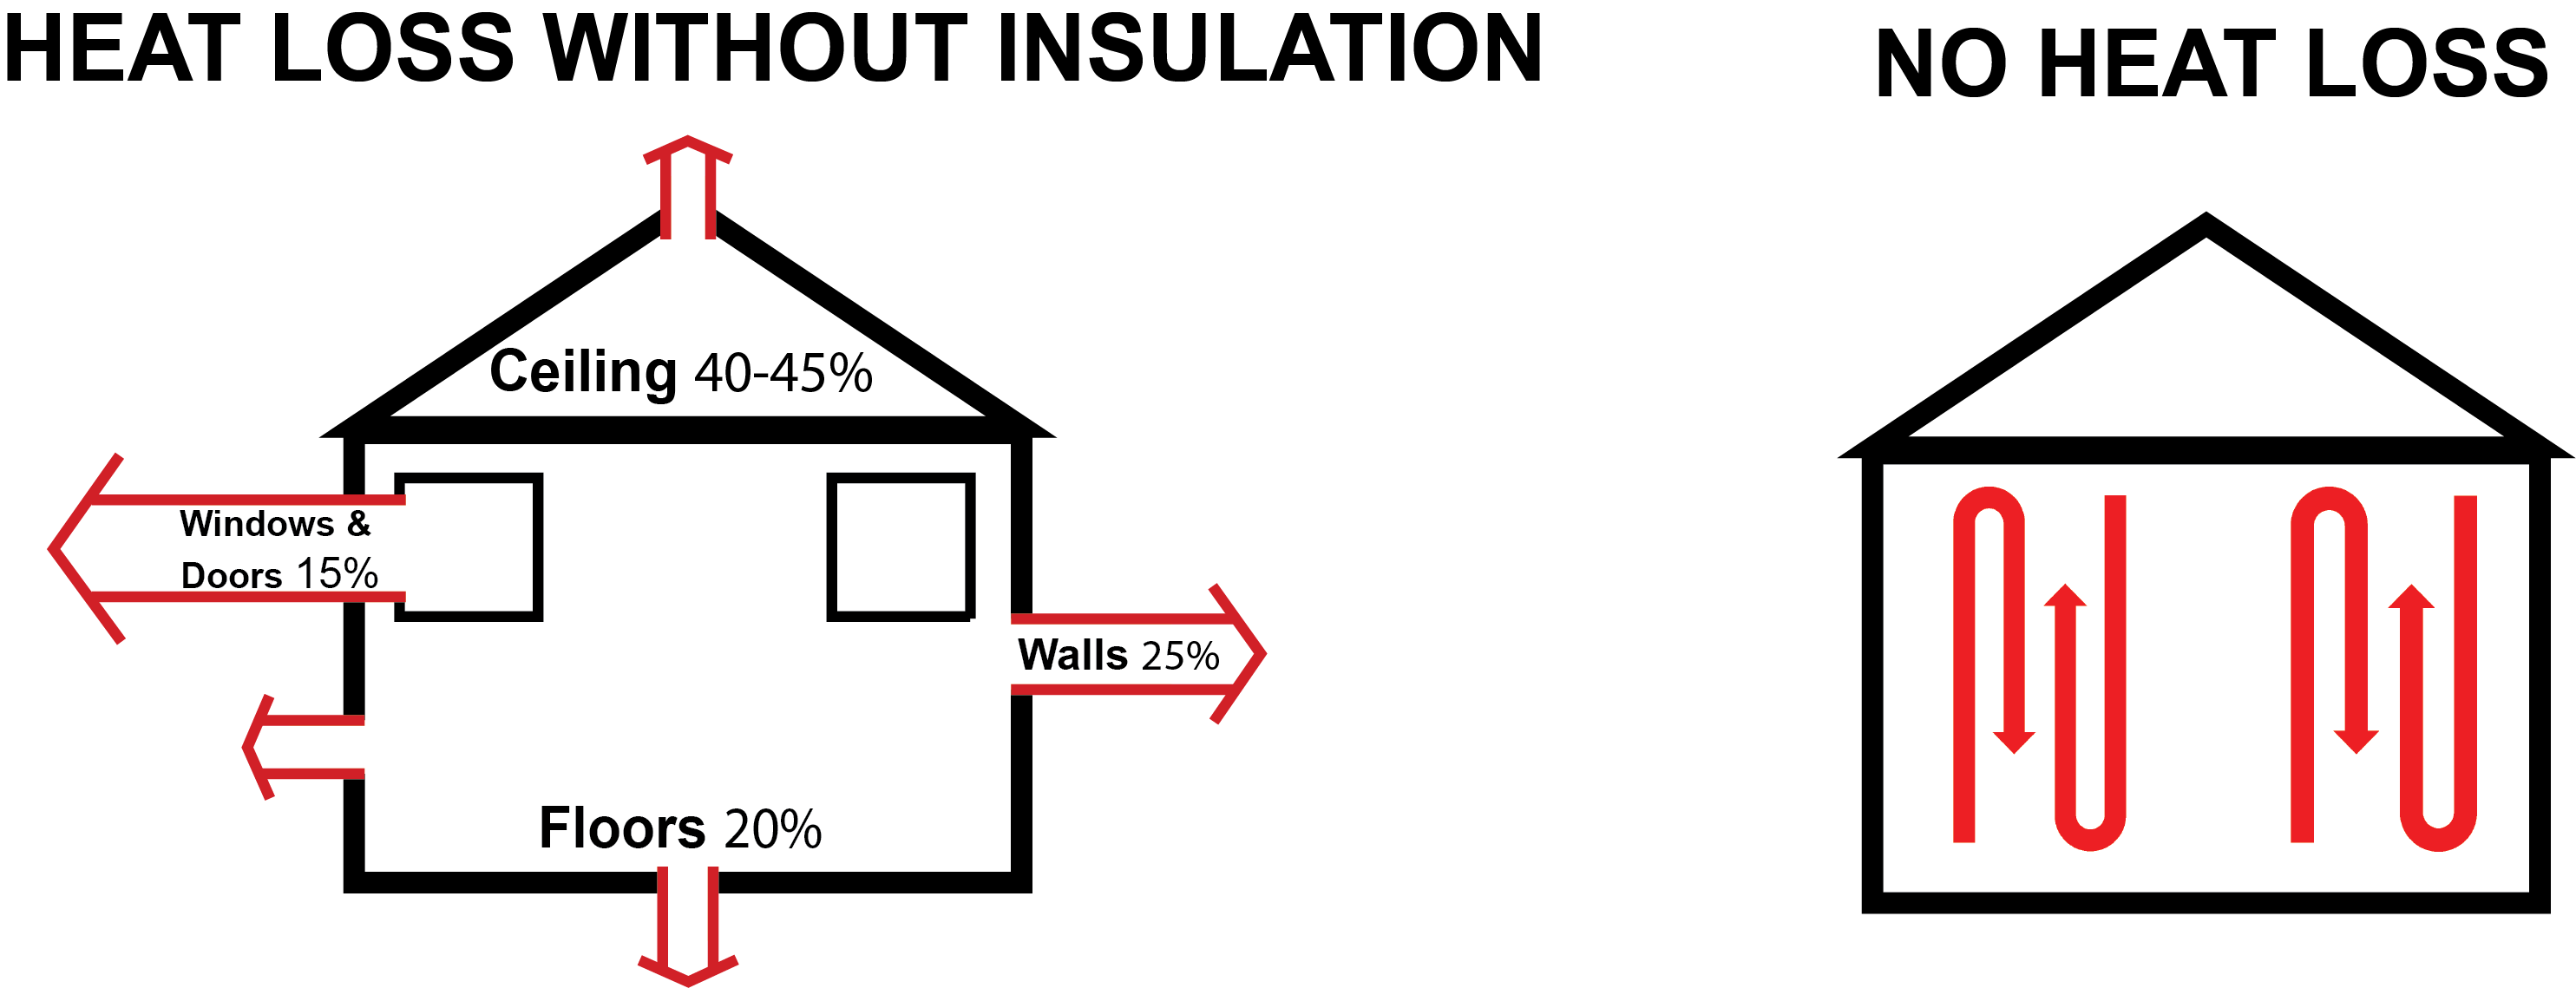 no gap insulation cheap melbourne victoria cold home cold house earthwool pink batts fletcher knauf csr bradford wall insulation ceiling acoustic underfloor thermal diagram loss